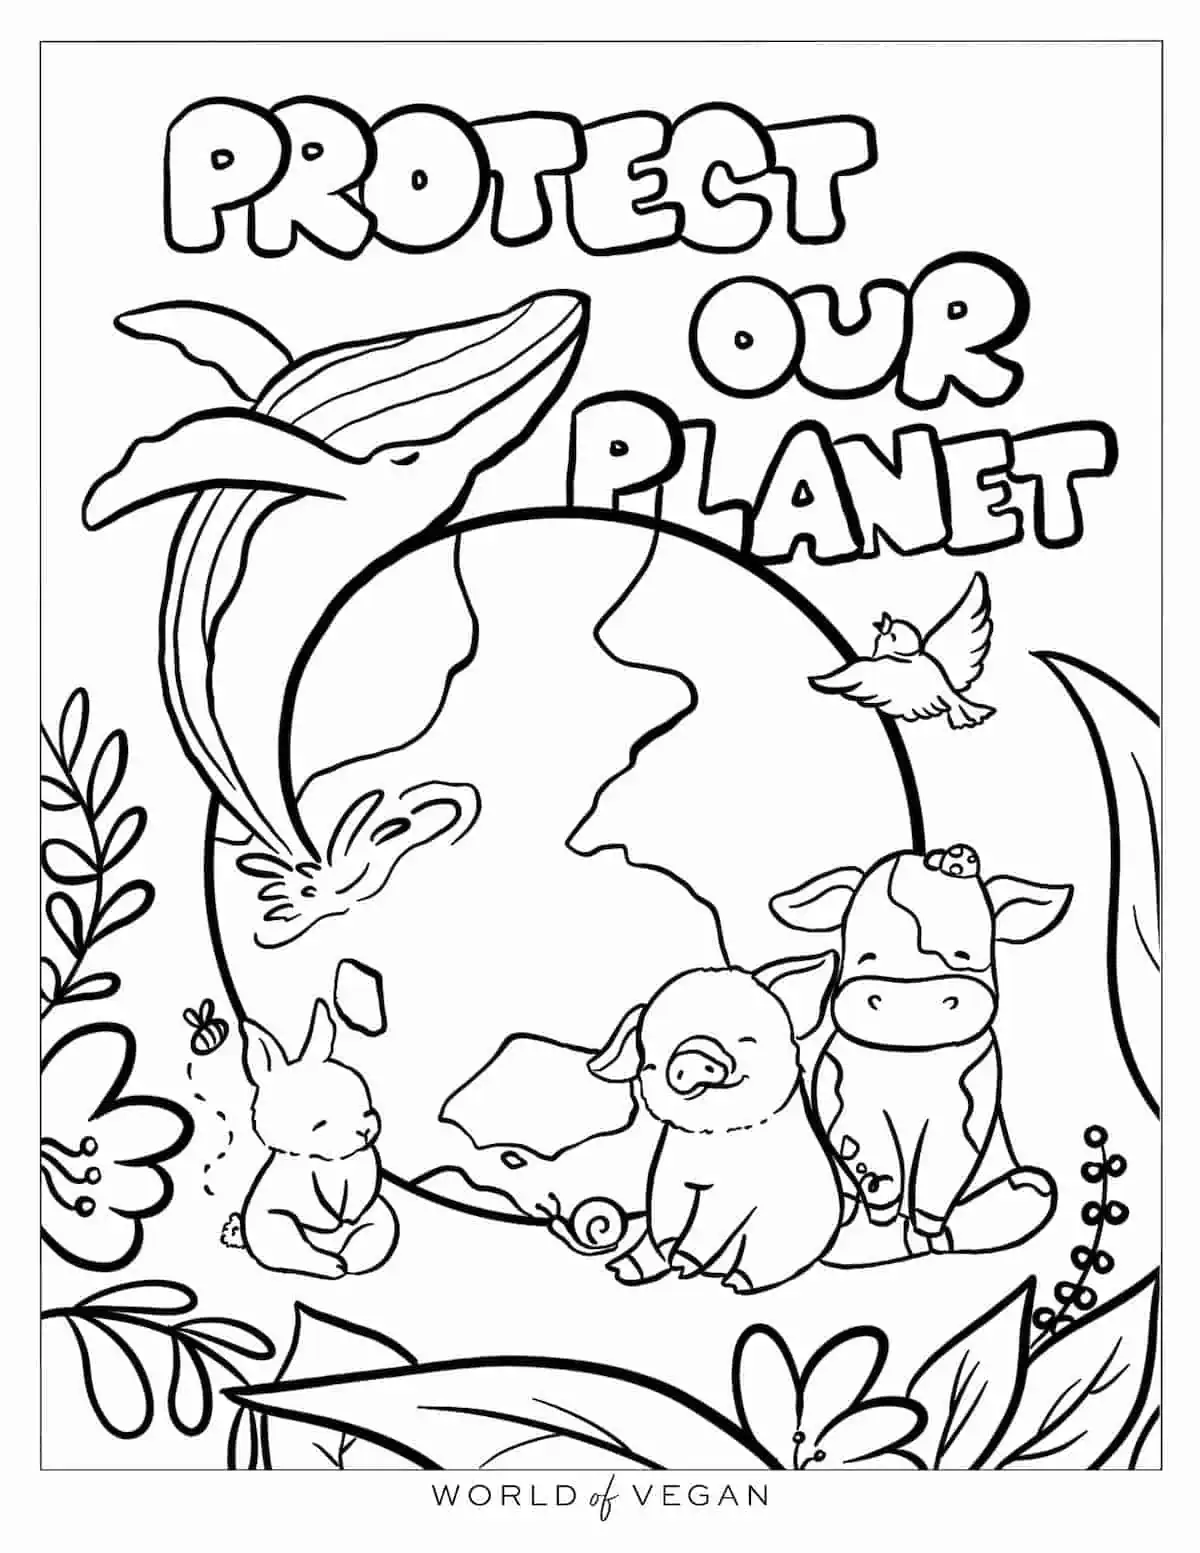 Earth day drawing coloring page with animals, the planet, a whale, and the words "Protect Our Planet."